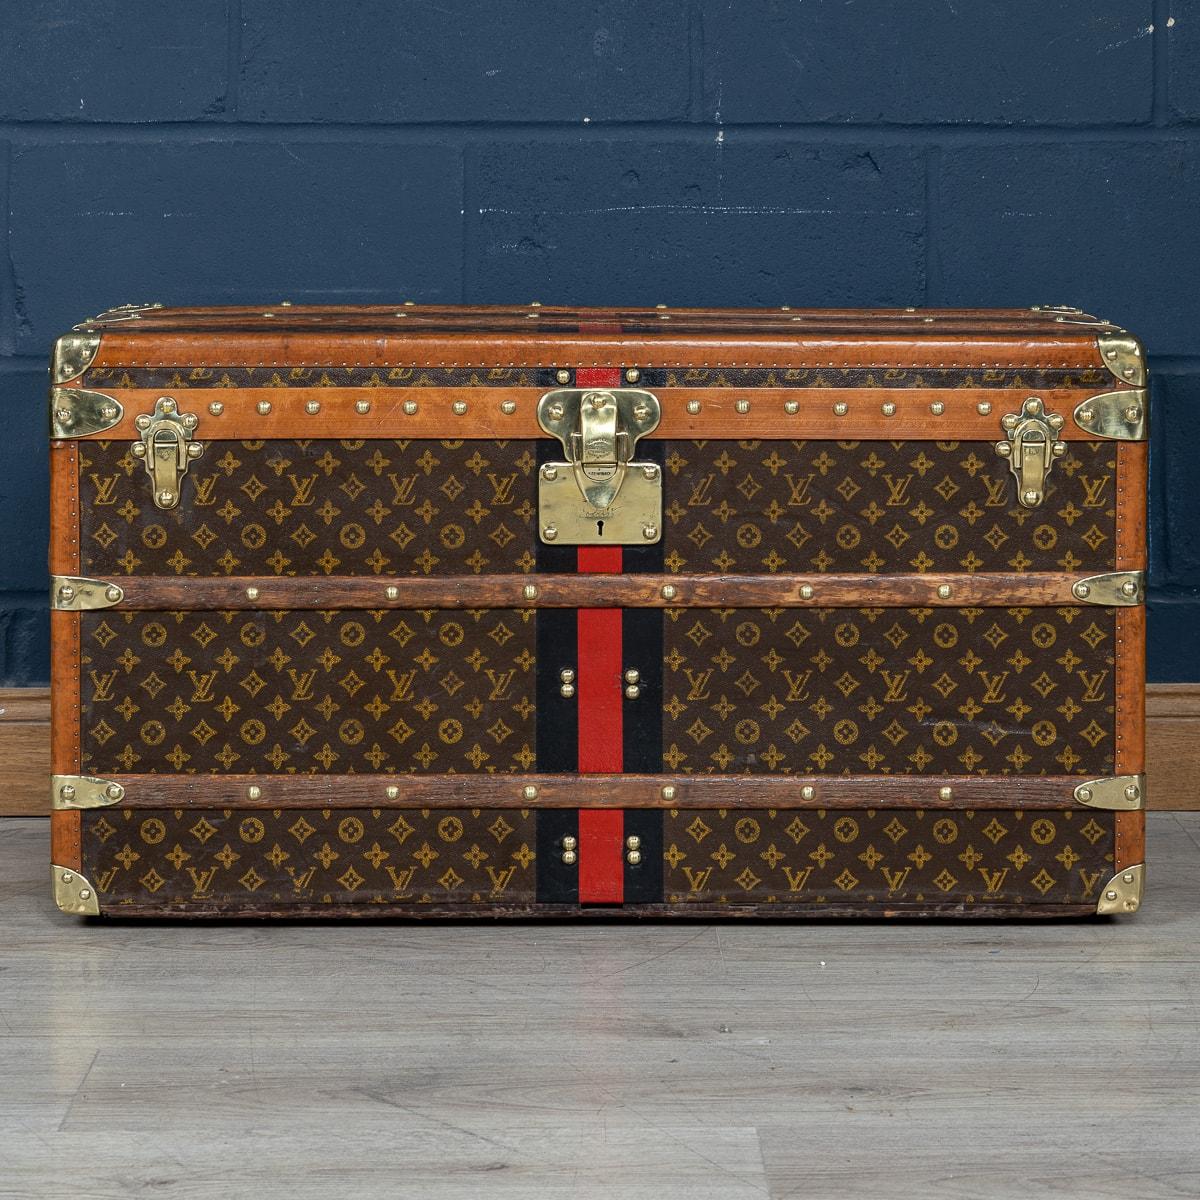 A magnificent and exceptionally rare Louis Vuitton shoe trunk, adorned with stencilled monogram canvas, lozine trim and brass fittings. Elevating its uniqueness is the remarkably uncommon size that distinguishes it from standard models. This